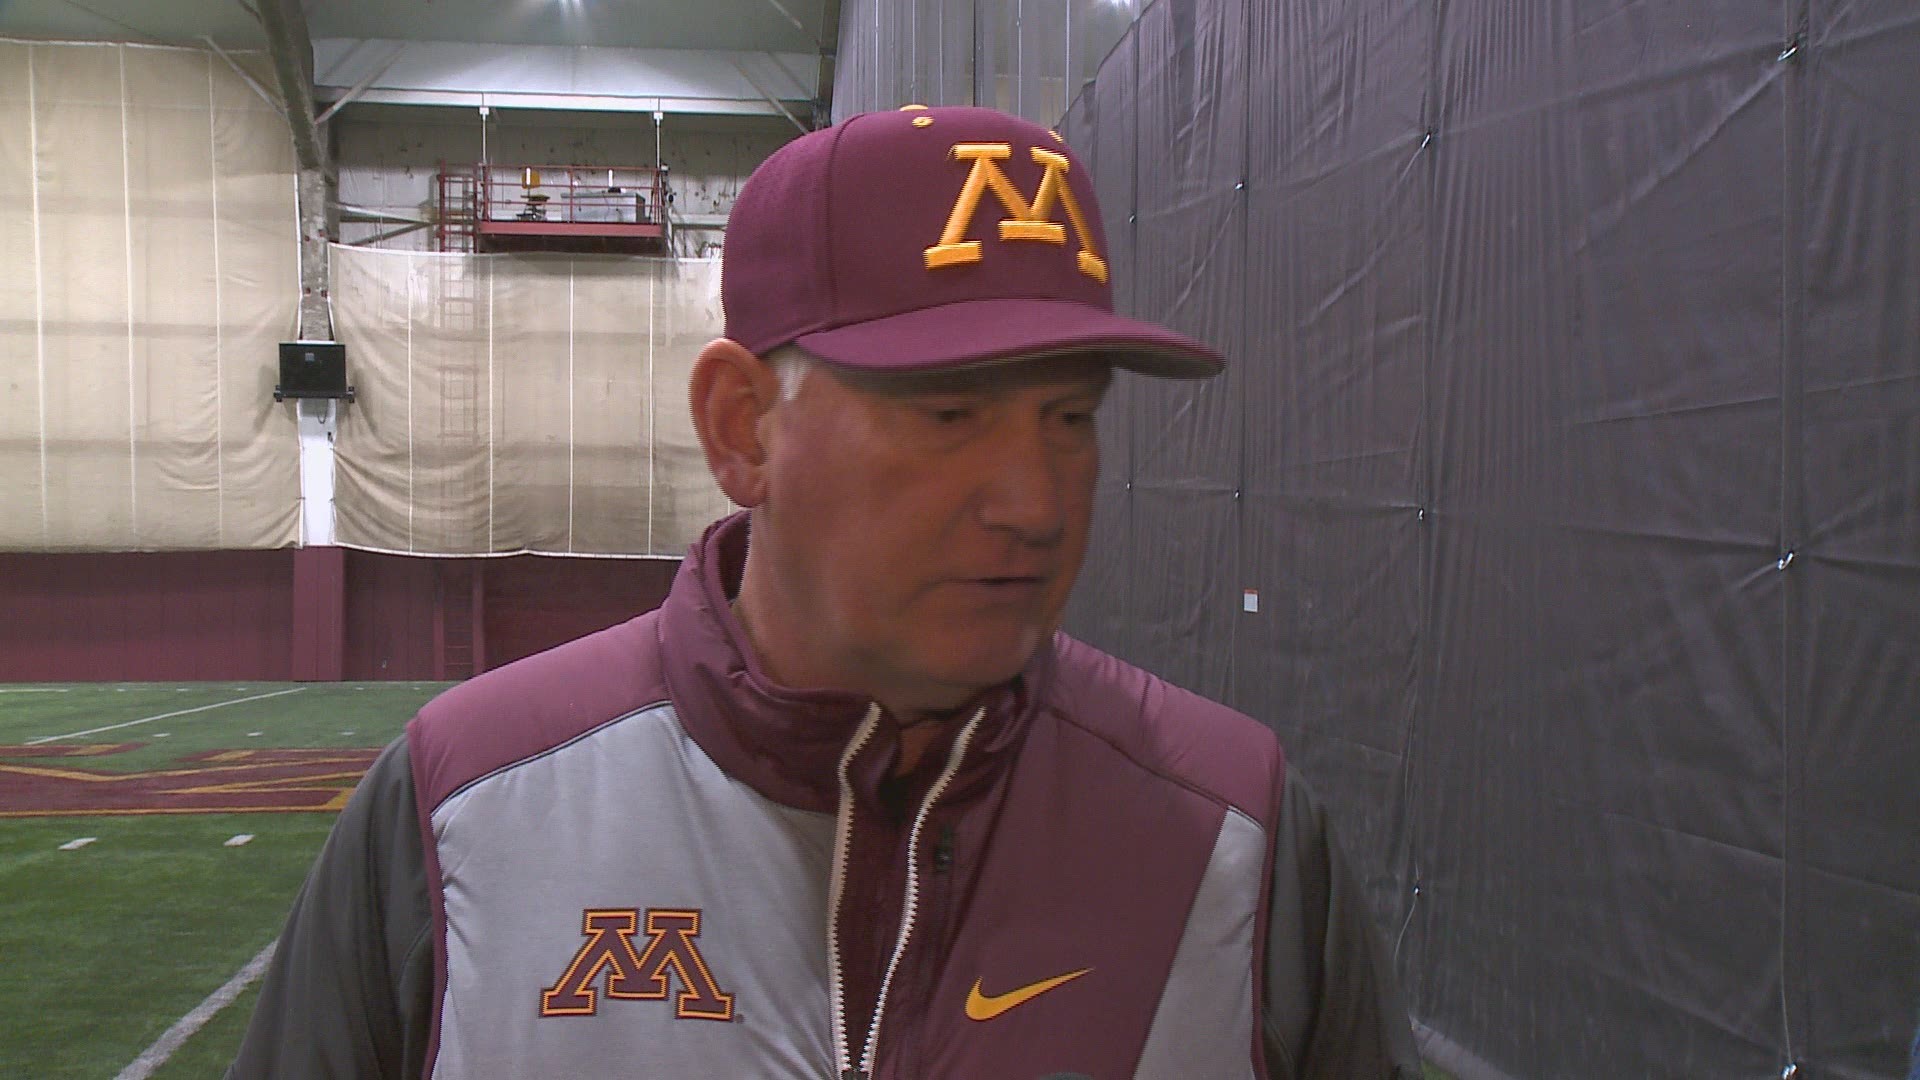 The baseball season is officially underway for the Gophers. After a great year in 2018, listen to head coach John Anderson talk about the expectations for 2019.